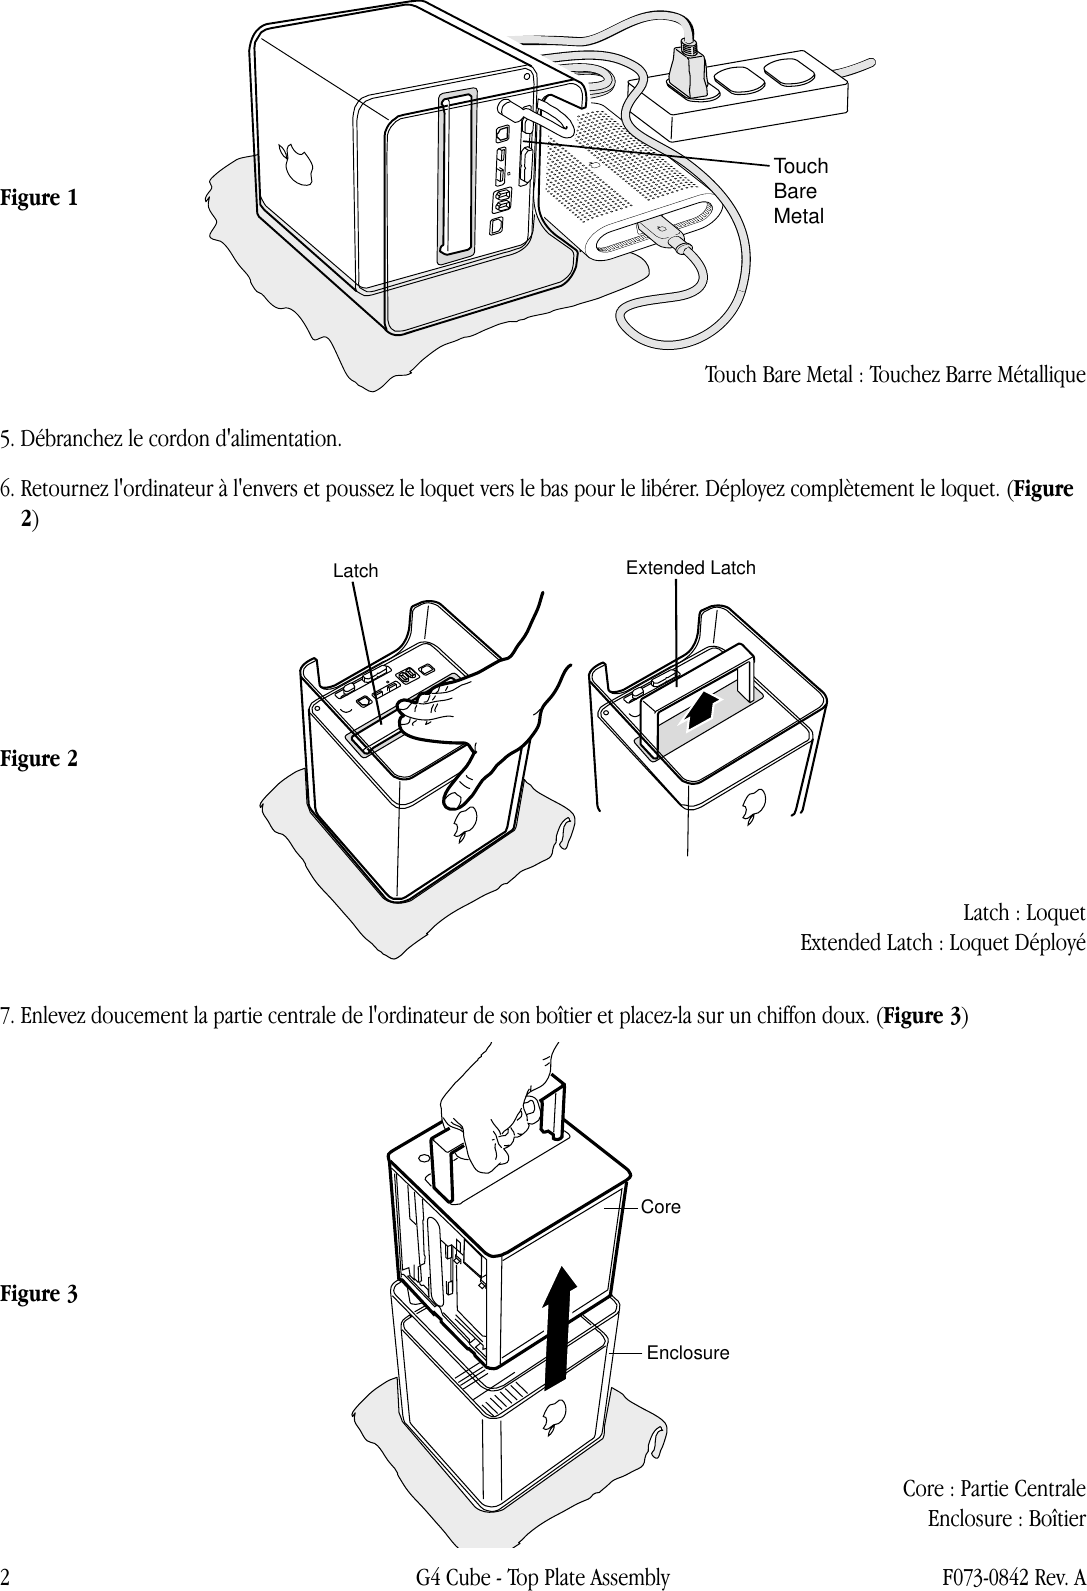 Page 2 of 7 - Apple Power Mac G4(Cube) Top Plate Assembly User Manual Power Mac G4(Cube)-Couvercle-Instructionsde Remplacement 073-0842-a